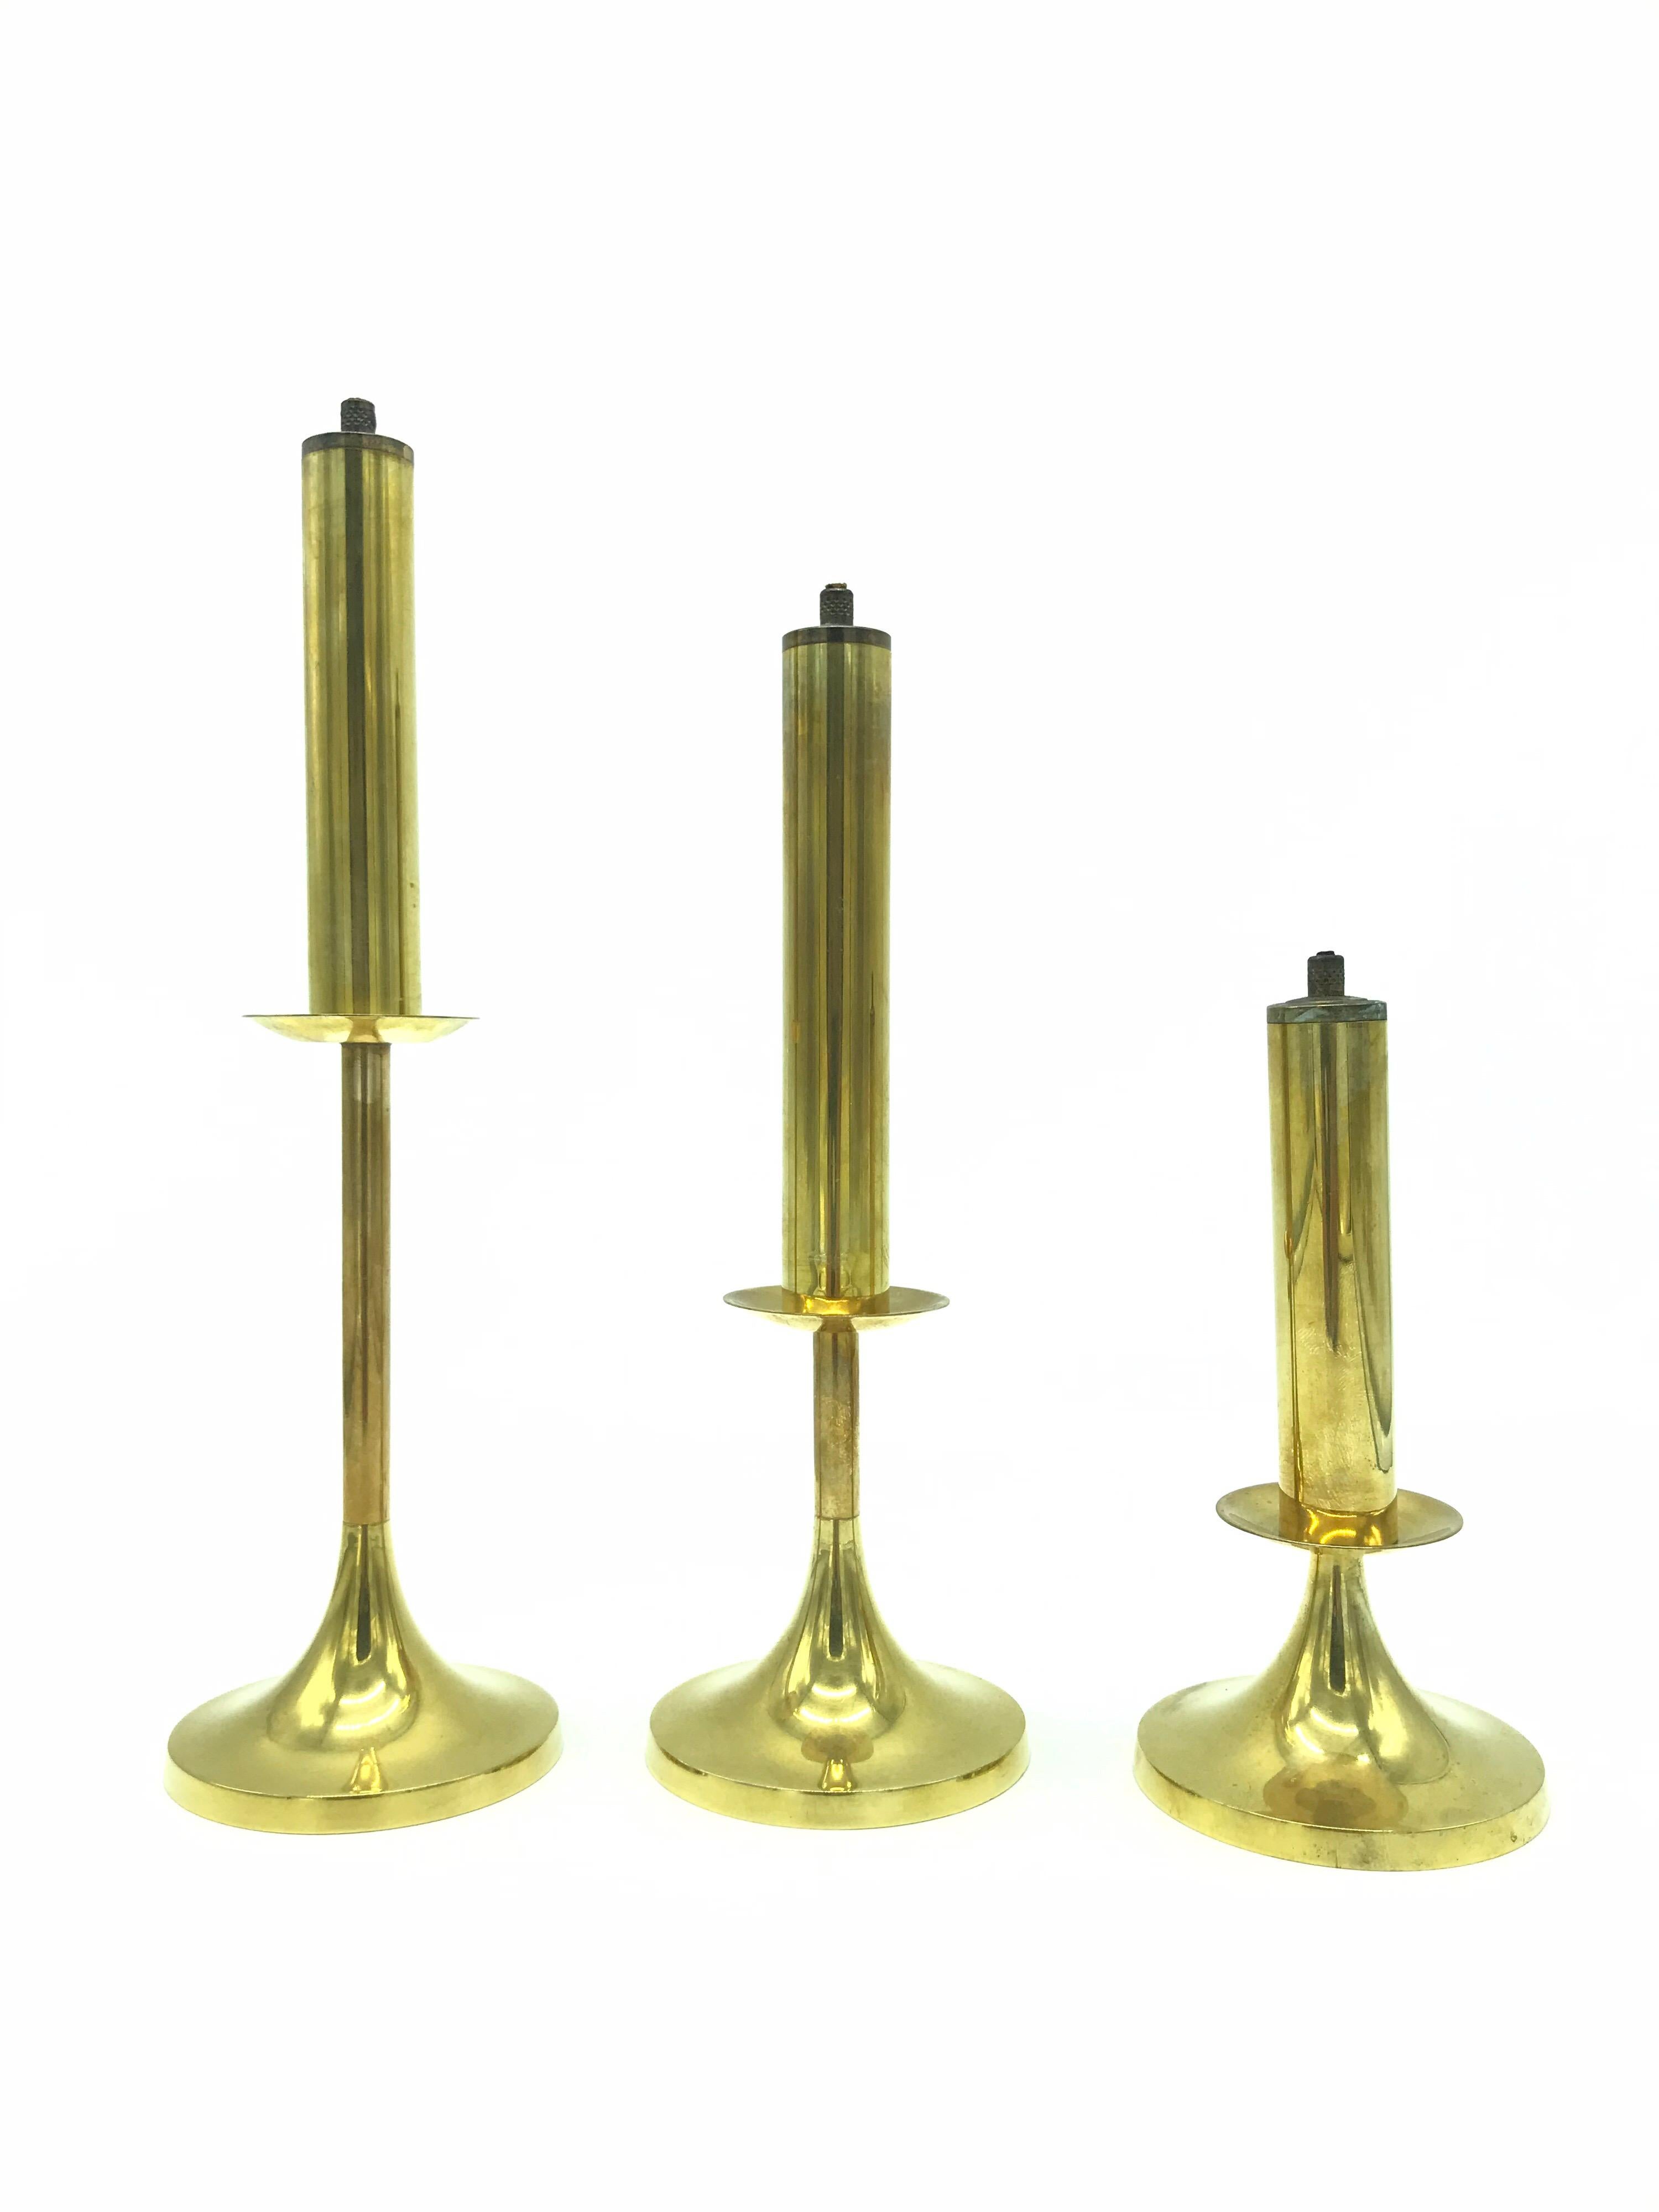 A set of 3 midcentury Danish design brass oil lamps
These 3 oil lamps would grace any table or side board
In great vintage condition and with wicks so ready to use.
The listing says price per item which is a mistake 
The price is for all 3 